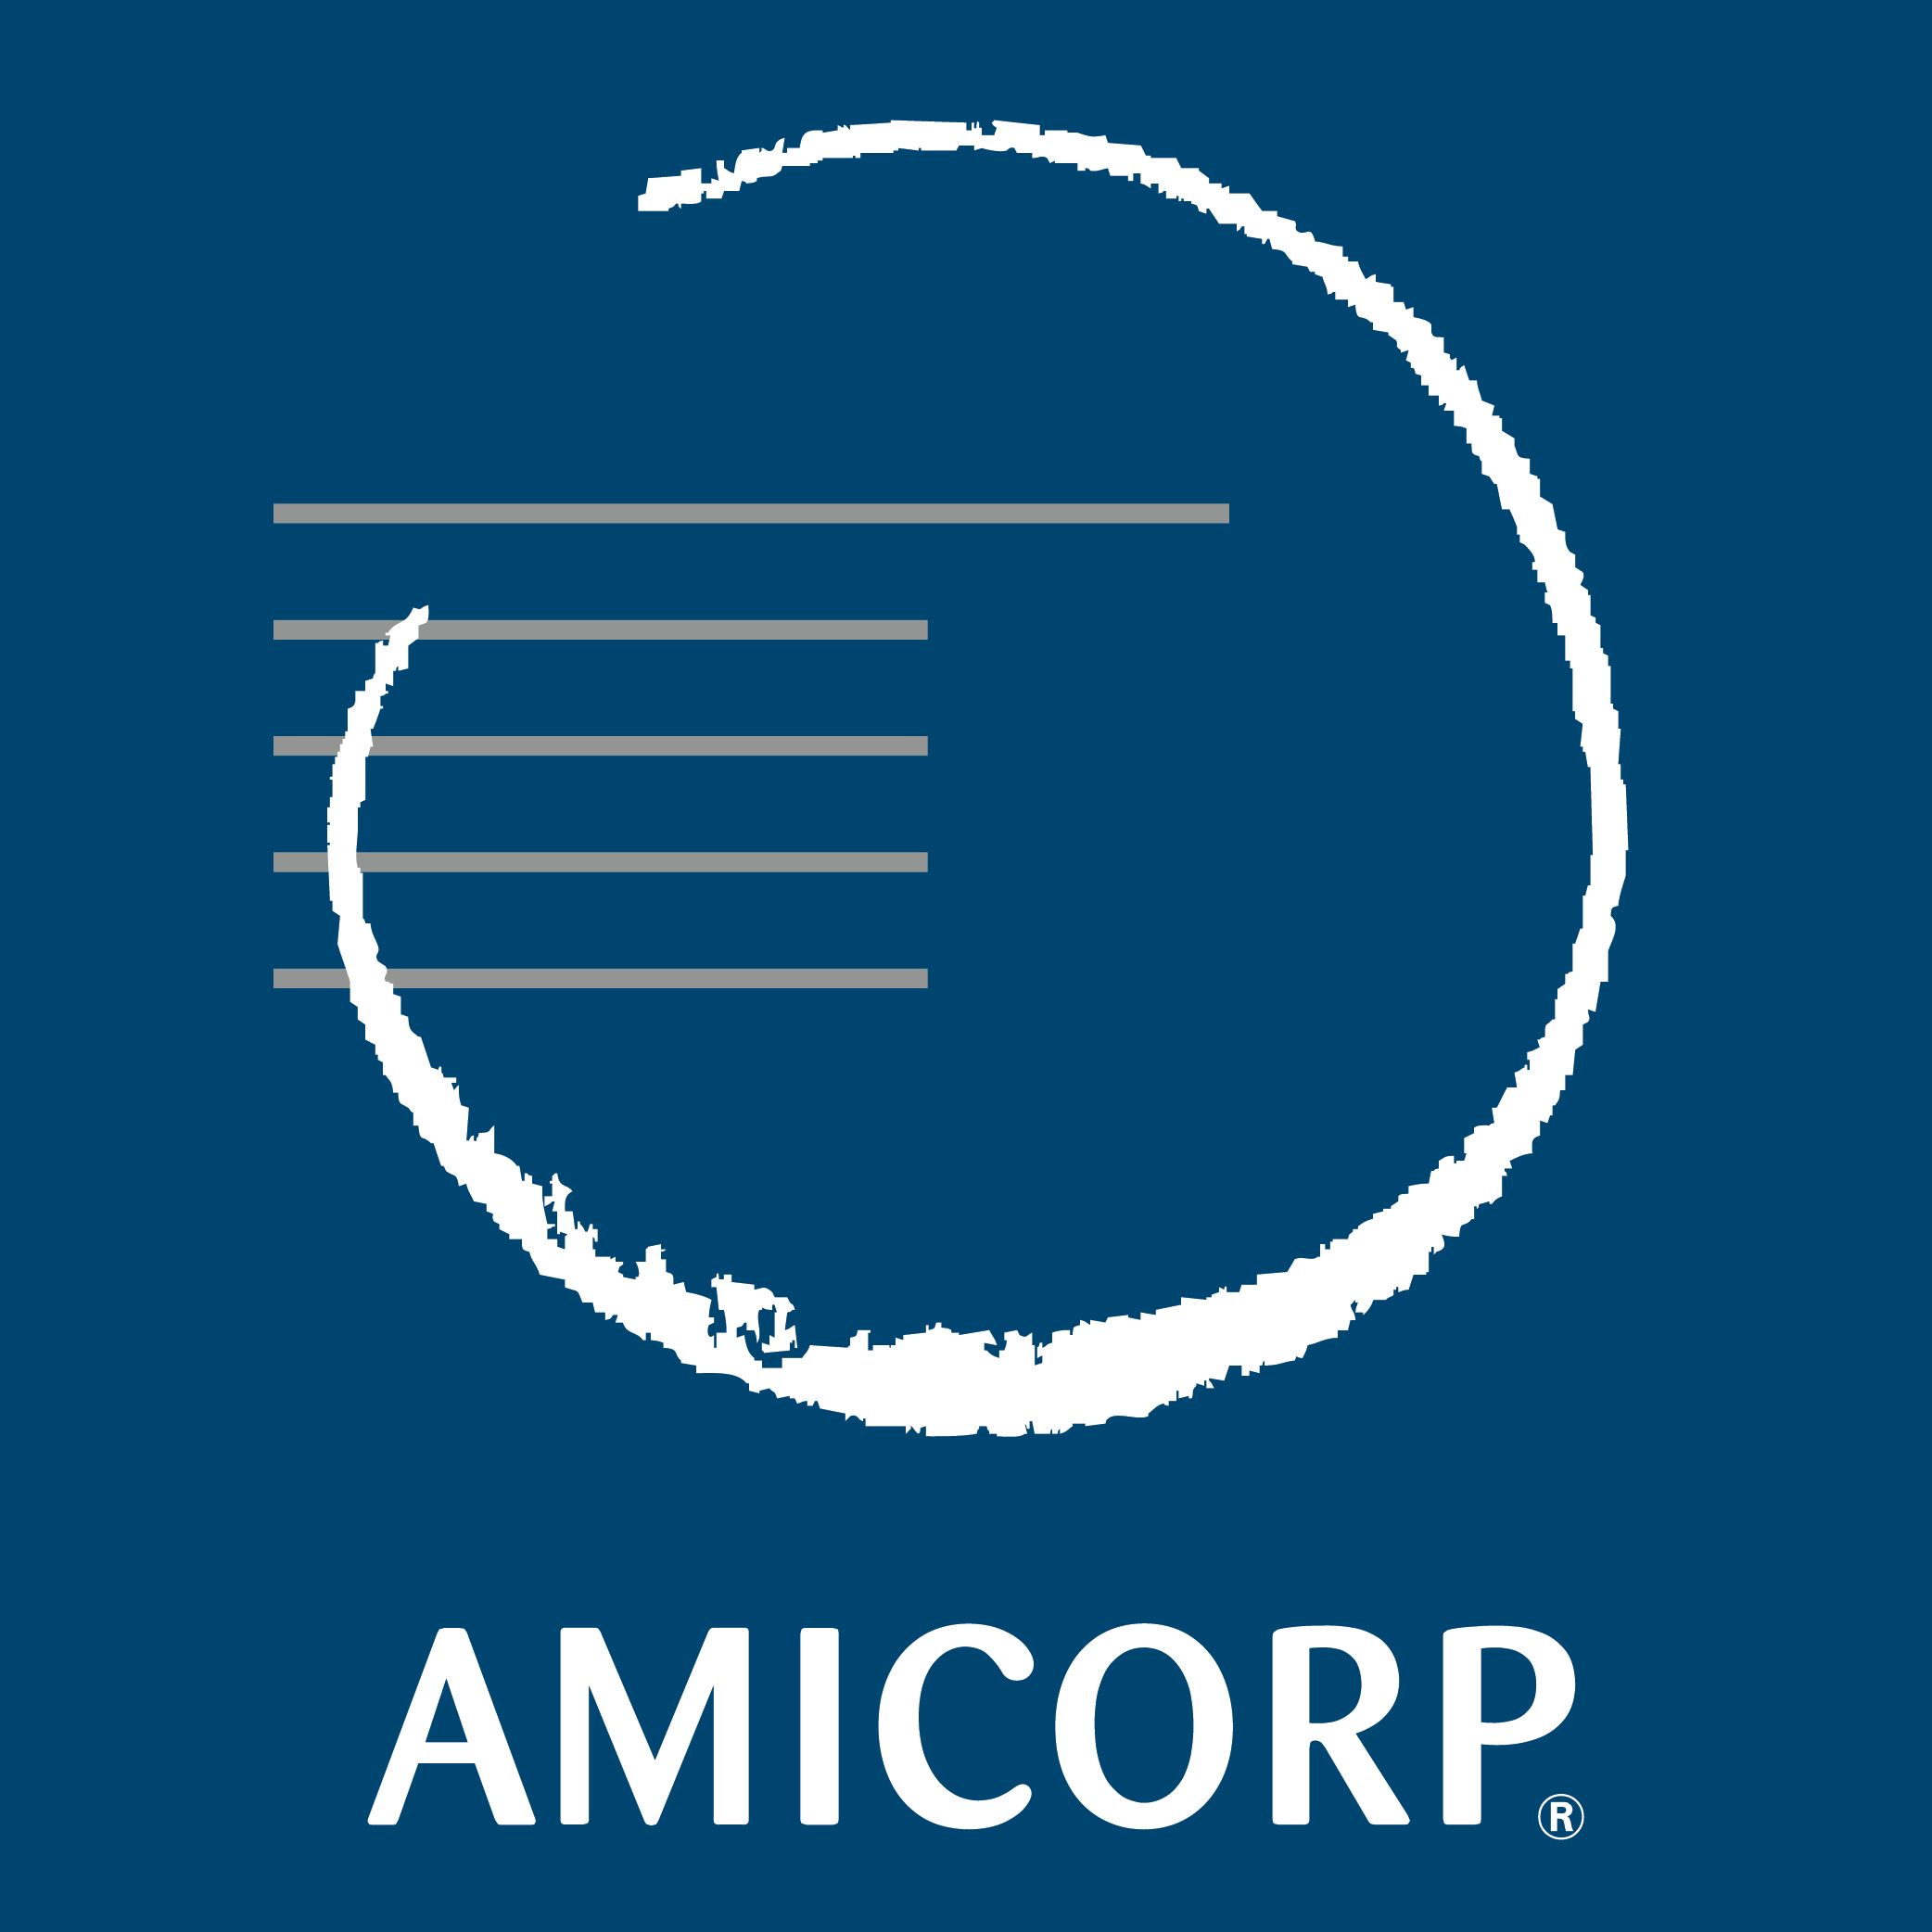 Amicorp Business Process Outsourcing Services B.V